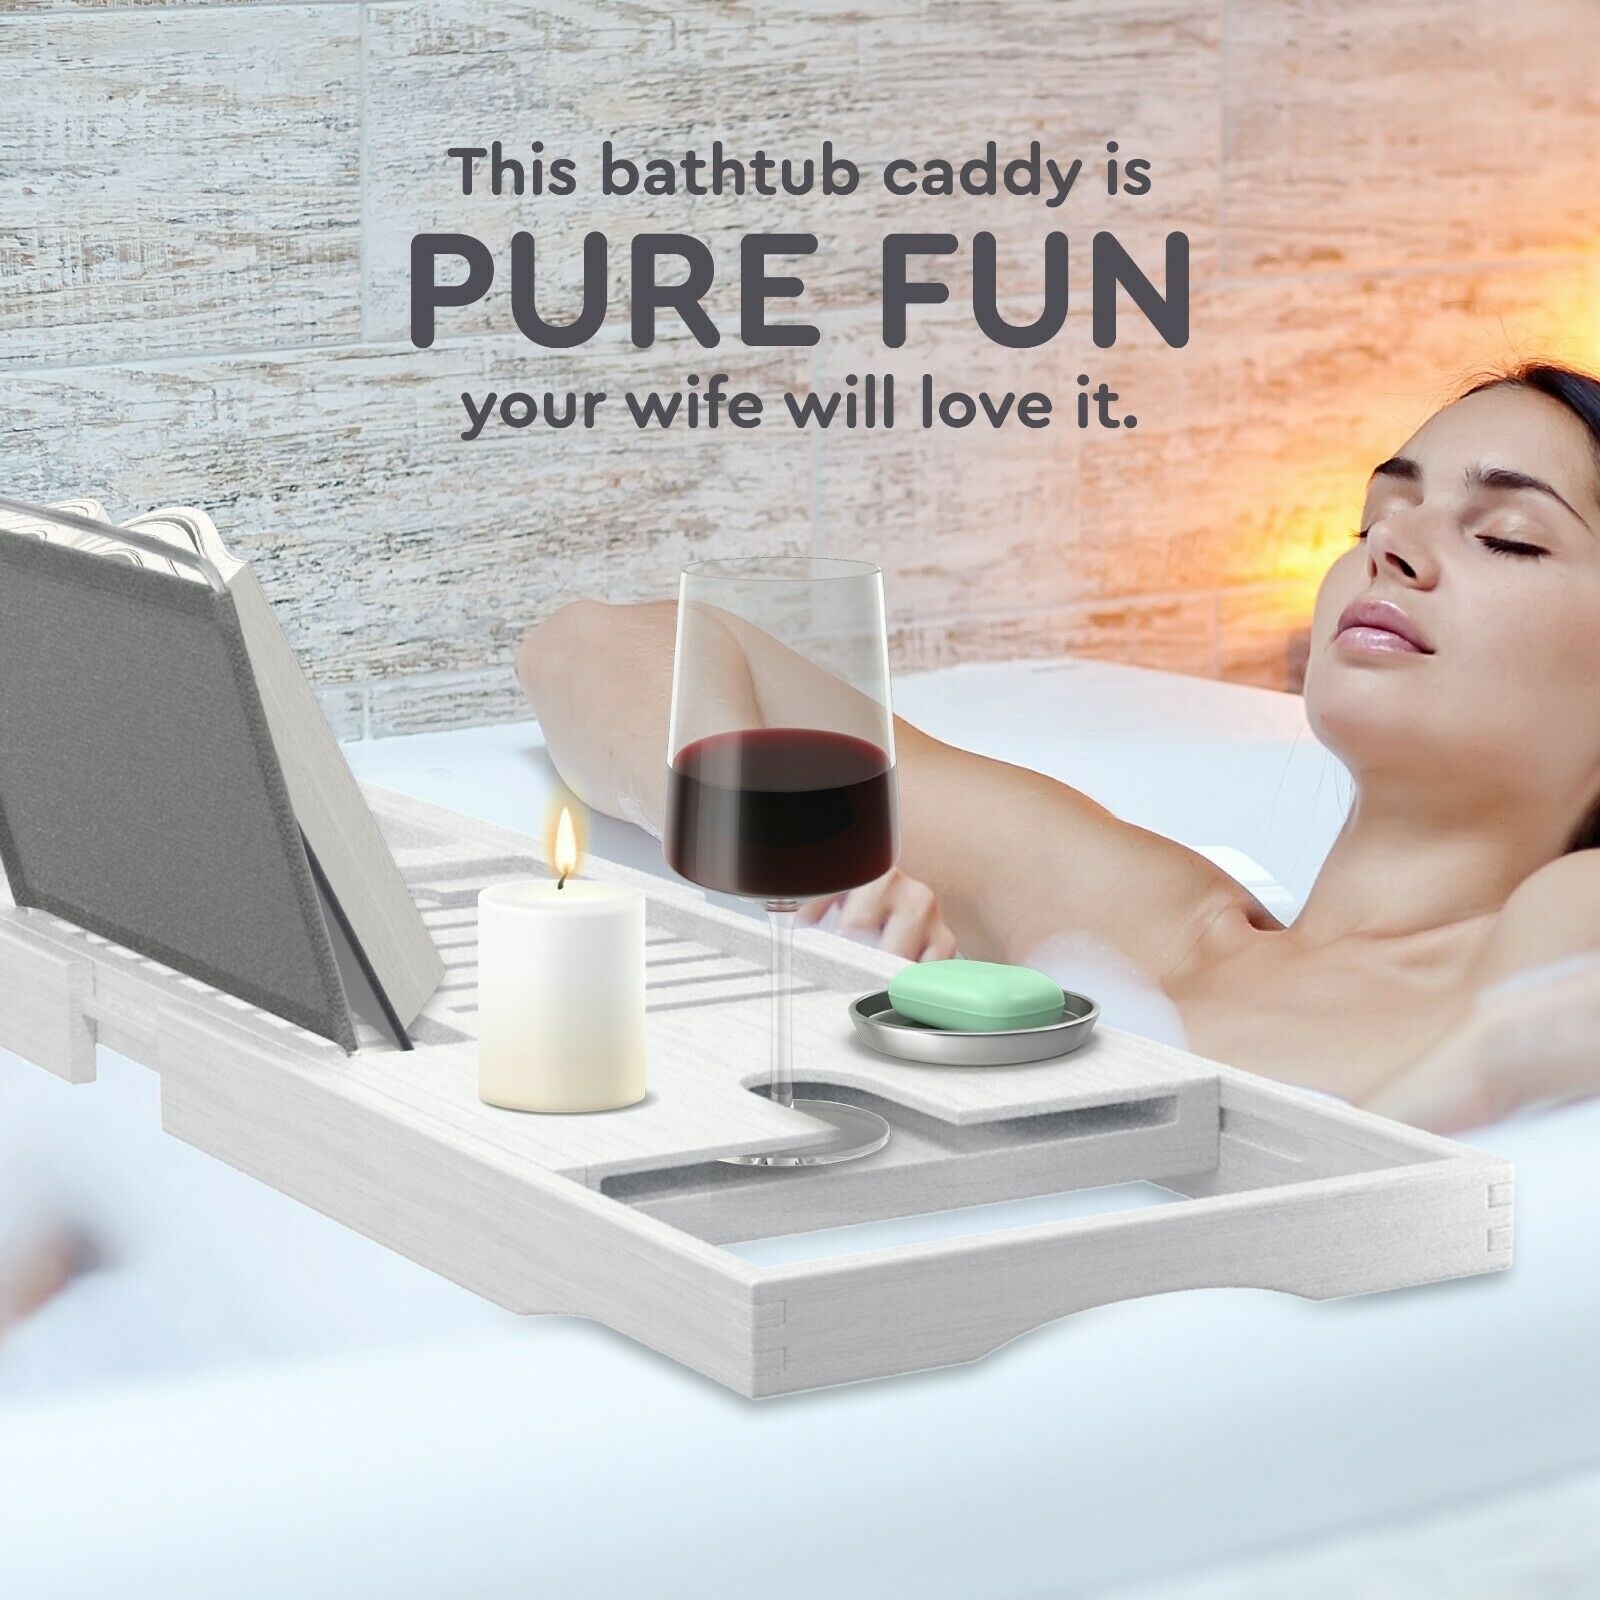 https://ak1.ostkcdn.com/images/products/is/images/direct/0e25340b5ee8e877ec81c3f6d94773e1a74d6c2d/Bambusi-Bathtub-Caddy-Tray-with-Extending-Sides%2C-Reading-Stand%2C-Wine-Holder-and-Cellphone-Tray.jpg